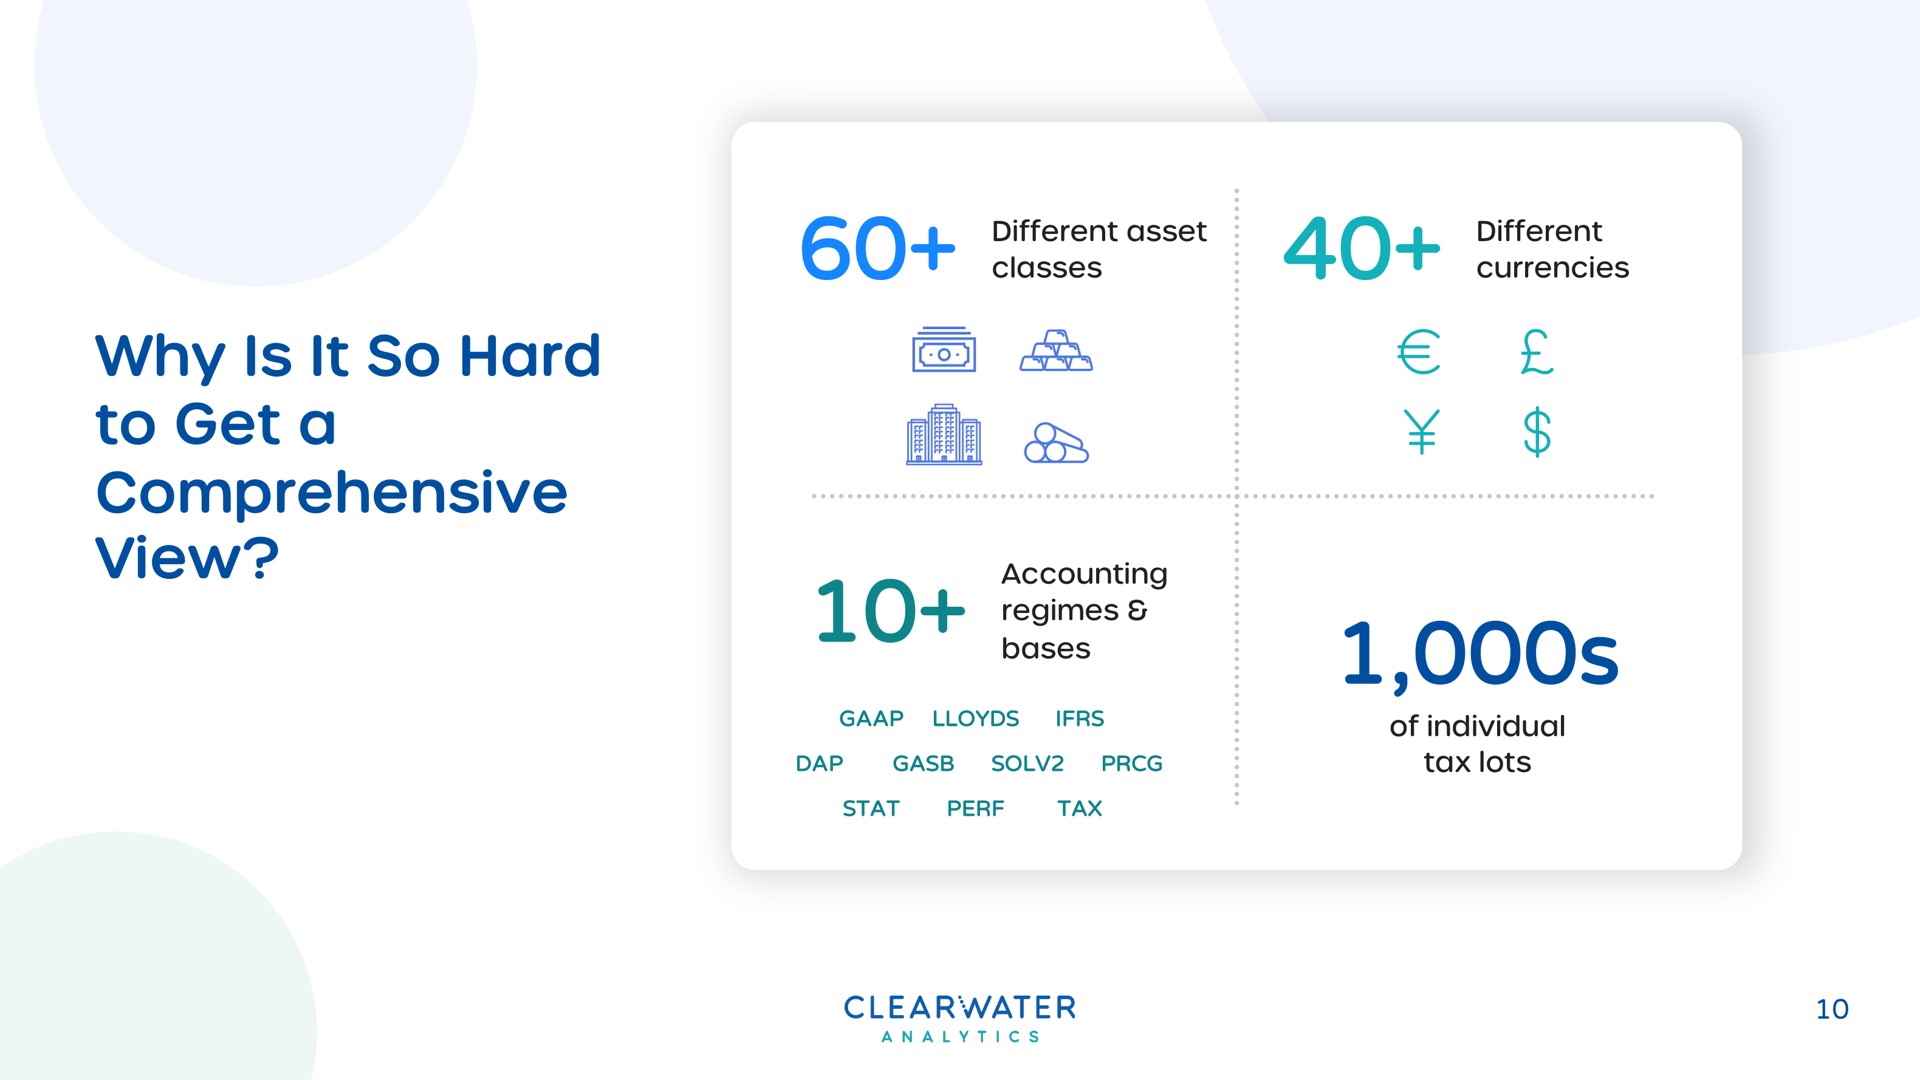 why is it so hard to get a comprehensive view geta | Clearwater Analytics